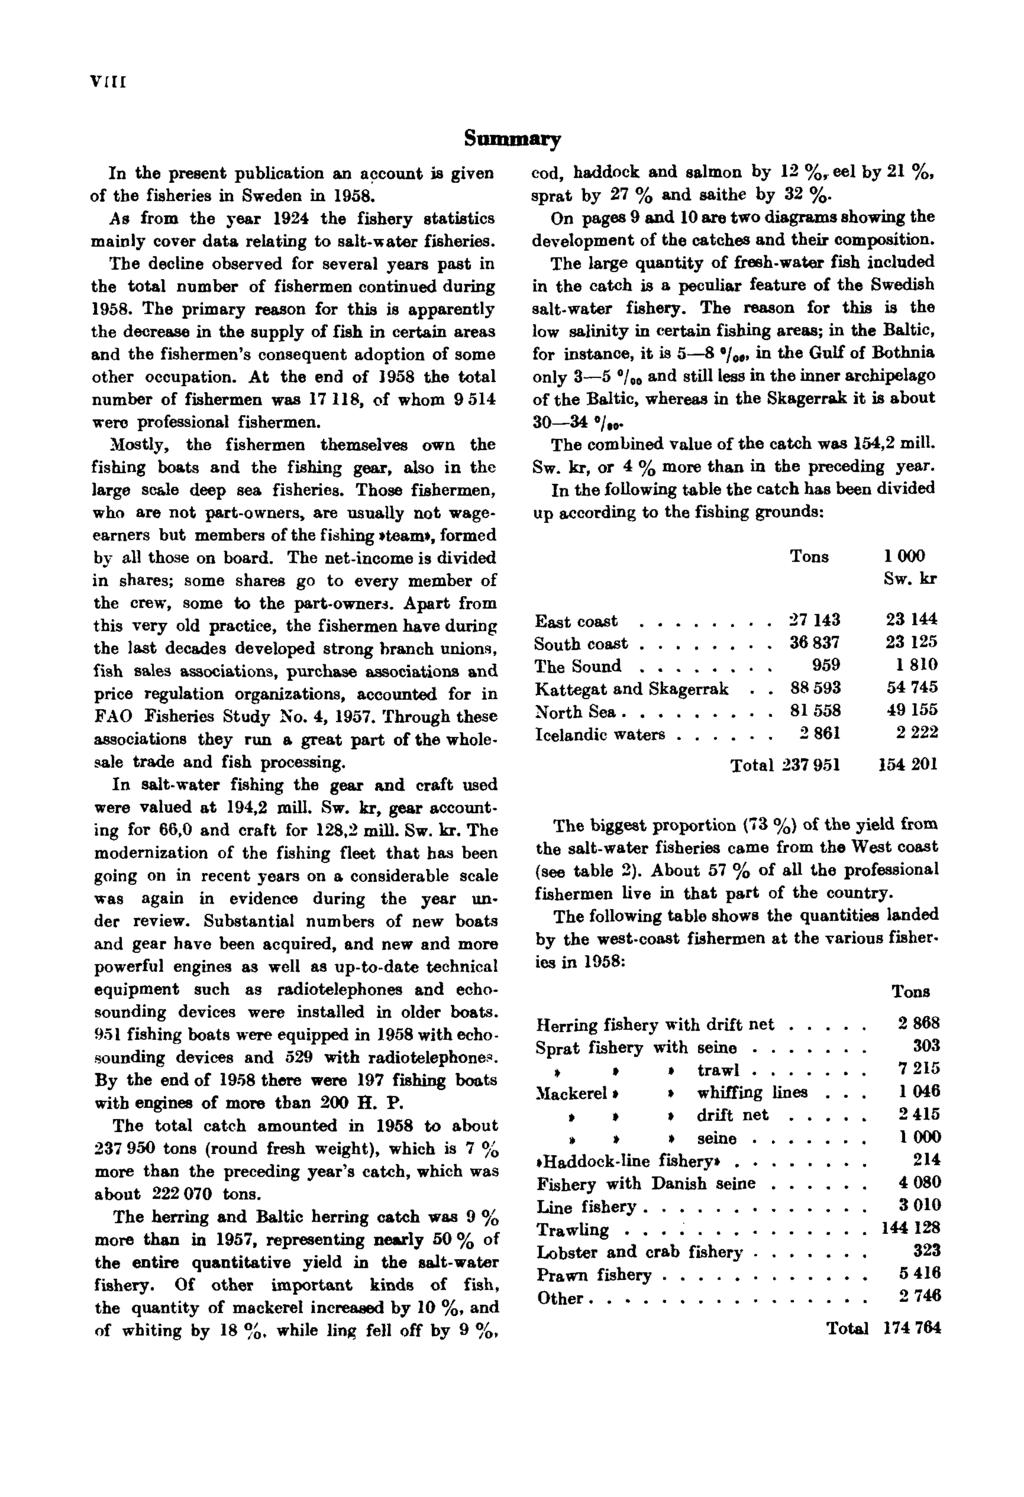 VIII In the present publication an account is given of the fisheries in Sweden in 1958. As from the year 1924 the fishery statistics mainly cover data relating to salt-water fisheries.